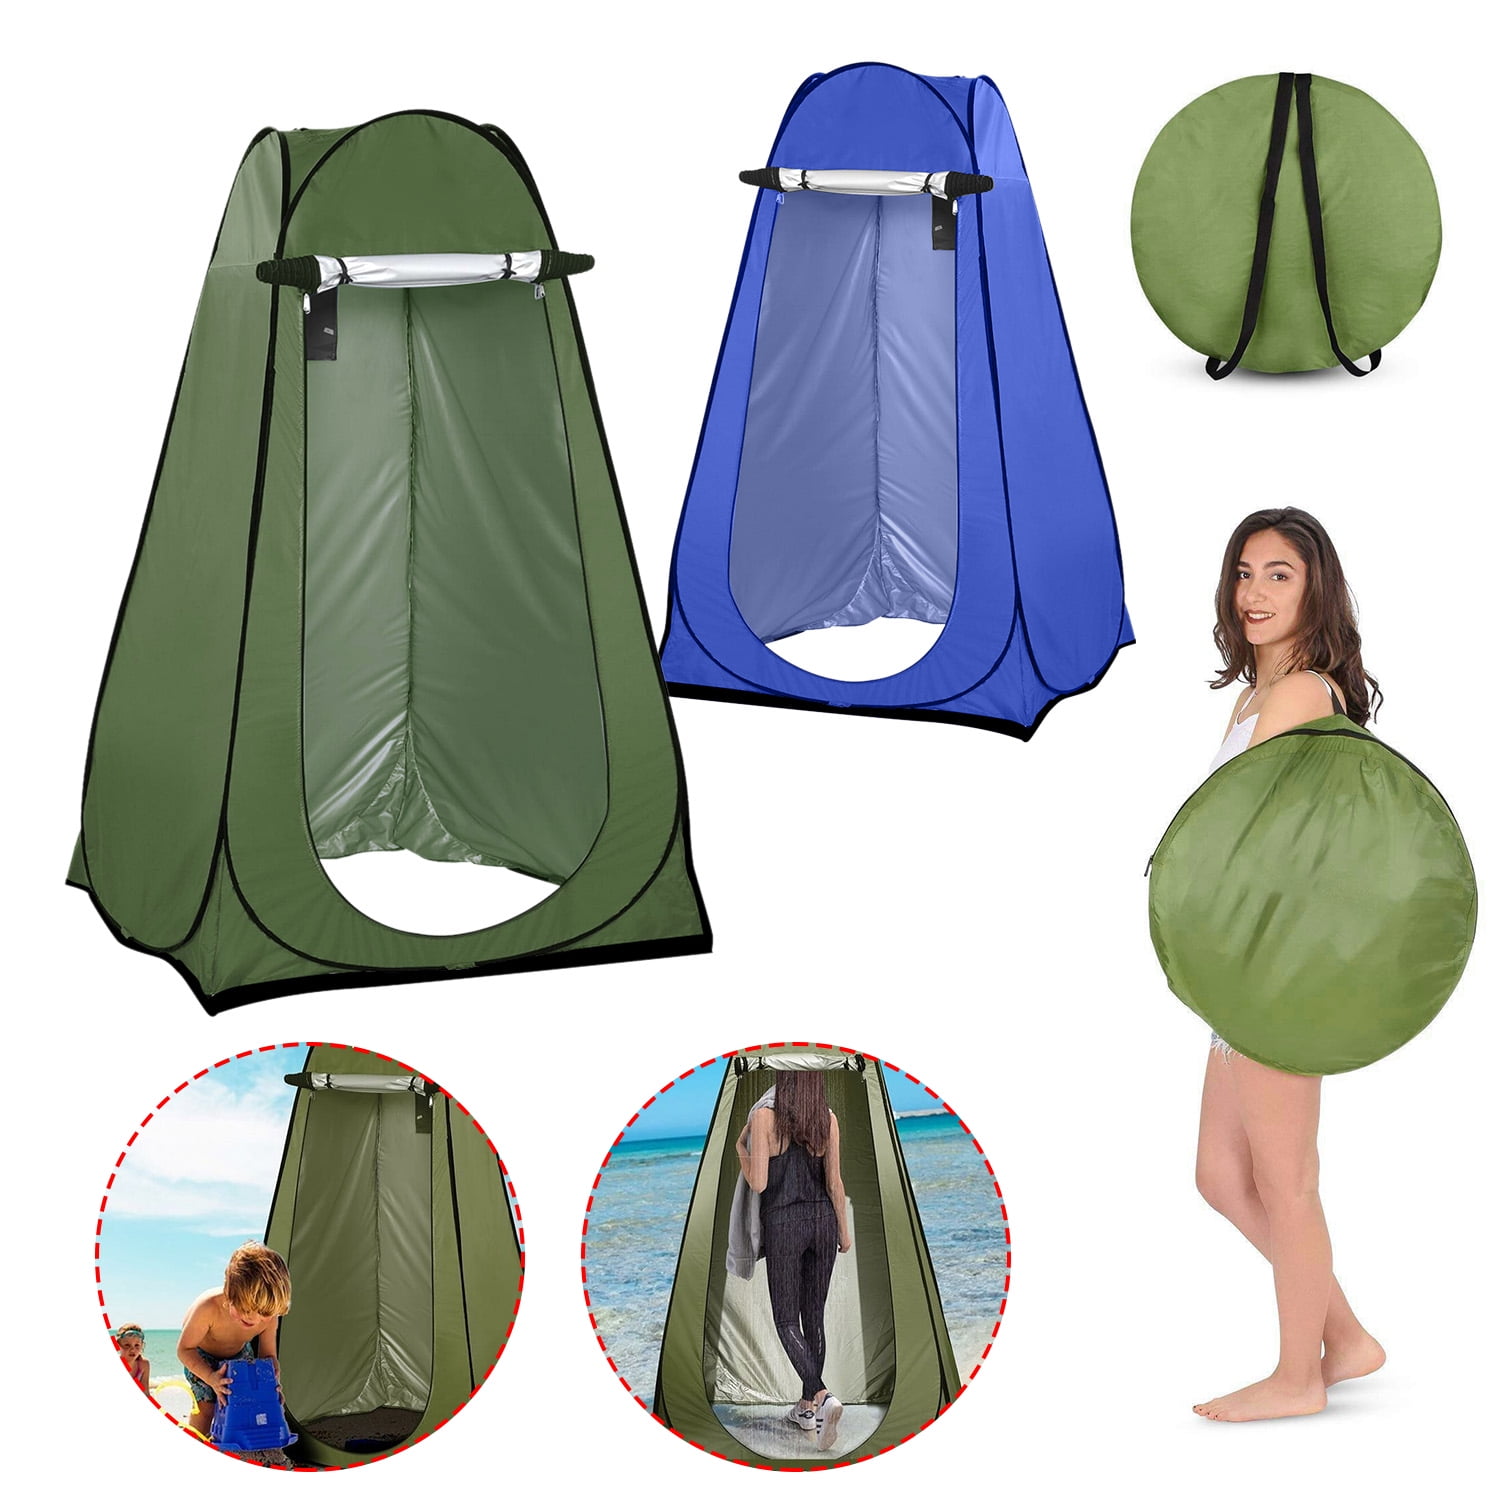 Portable Green Outdoor Pop Up Tent Camping Shower Privacy Toilet Changing Room 